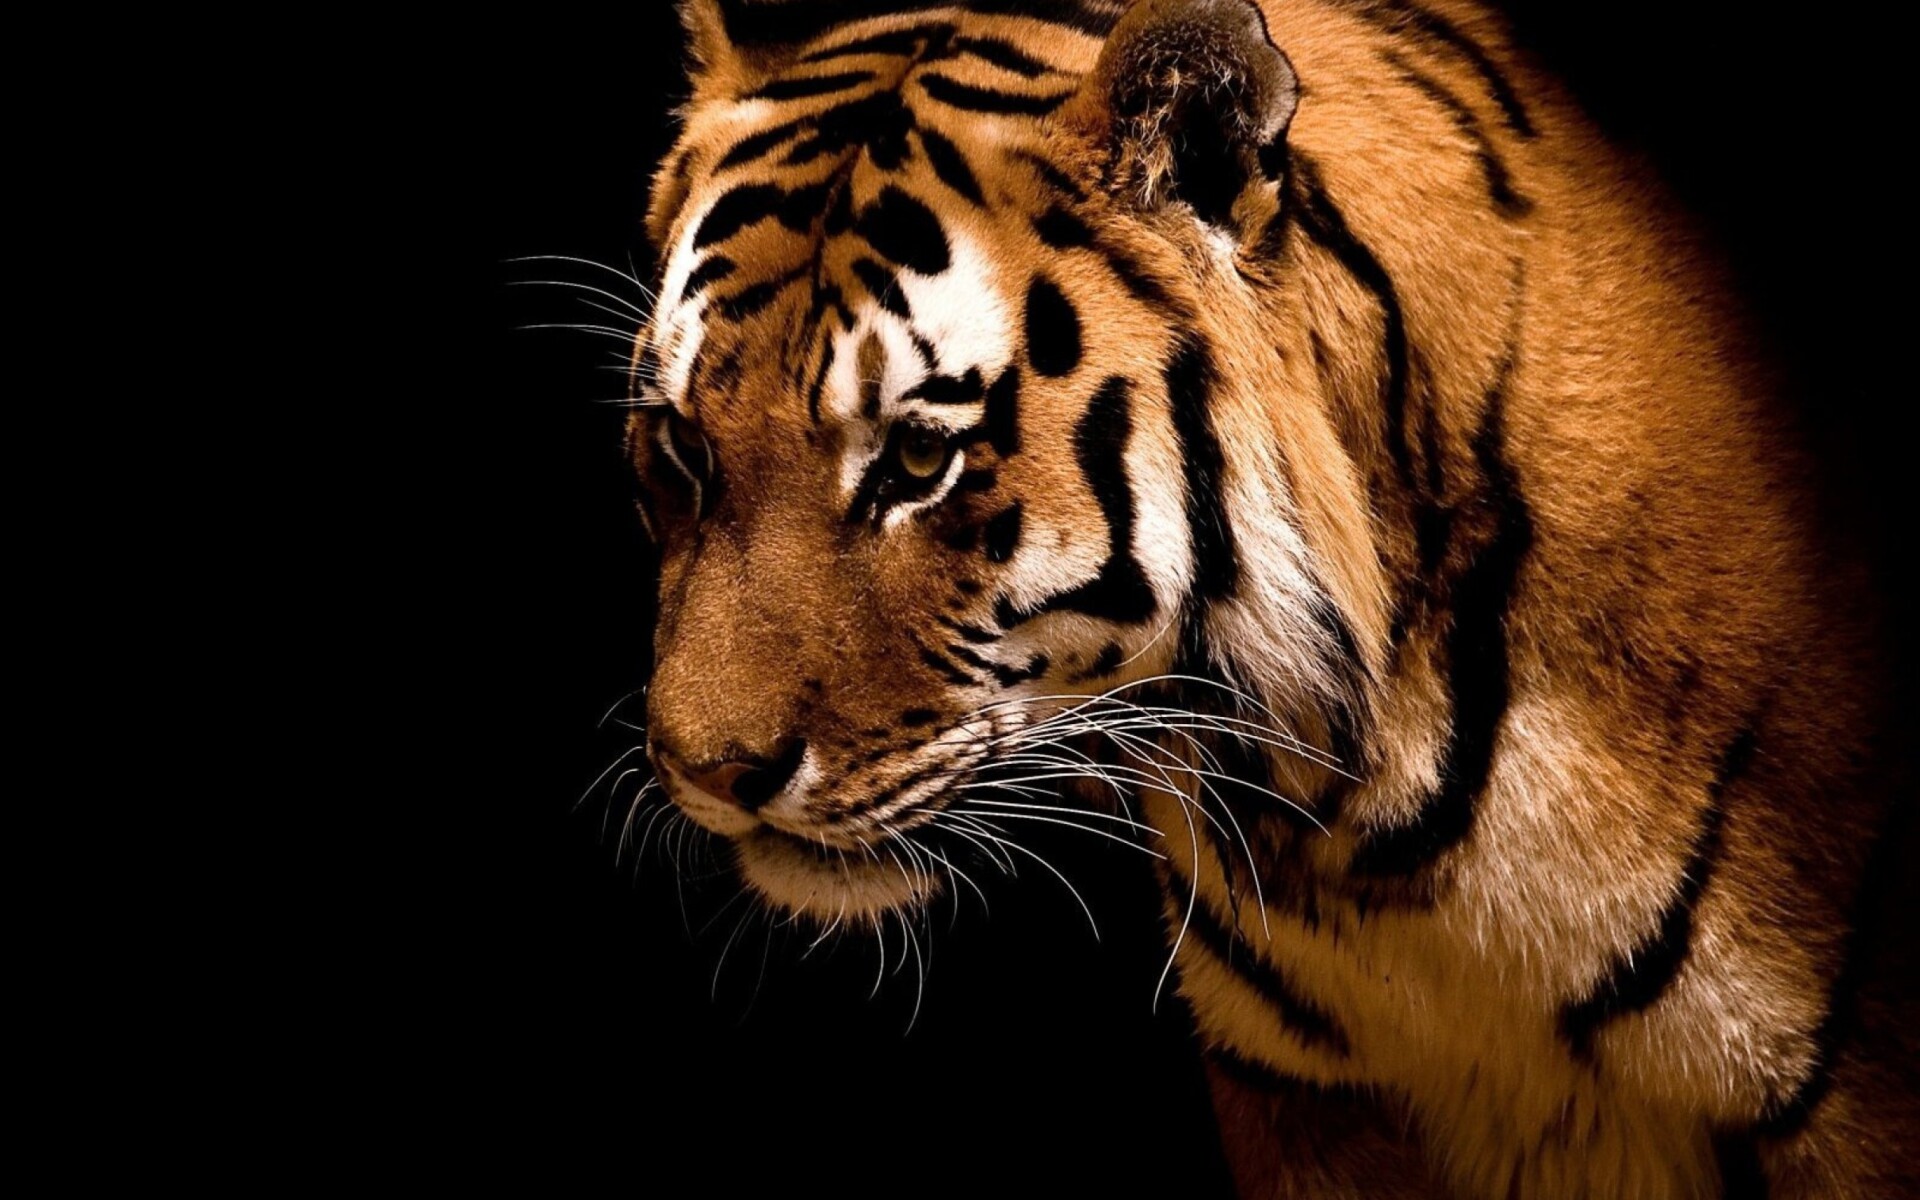 Tiger: These powerful cats hunt primarily at night, using sight and sound to identify prey. 1920x1200 HD Wallpaper.